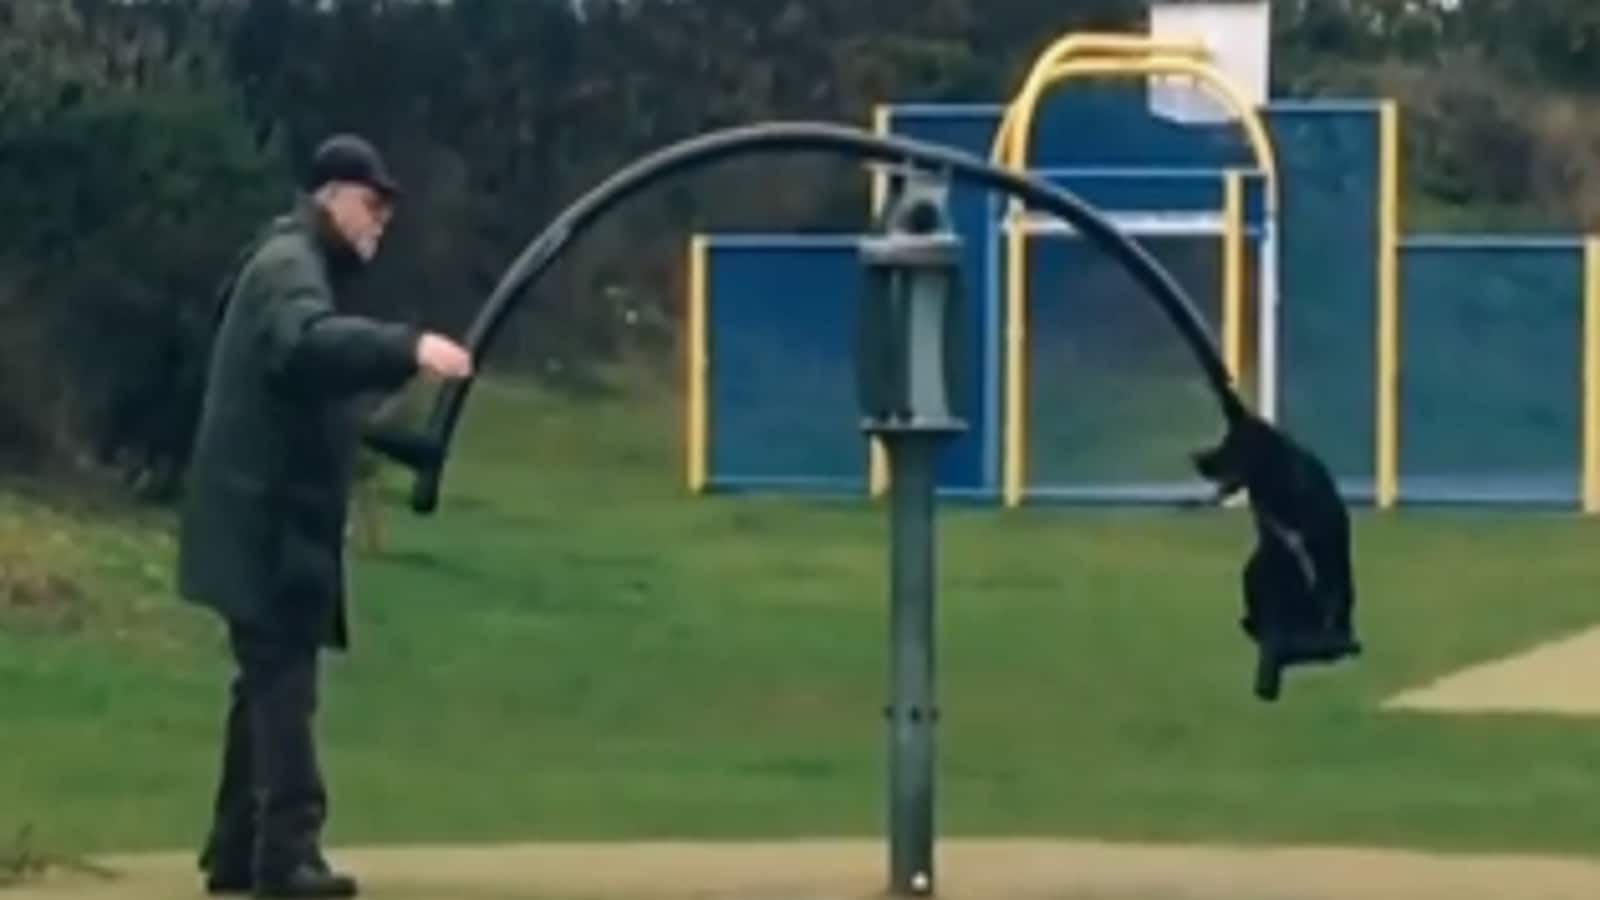 Watch: Adorable Video of Old Man Pushing His Dog on Merry-Go-Round is Pure Love